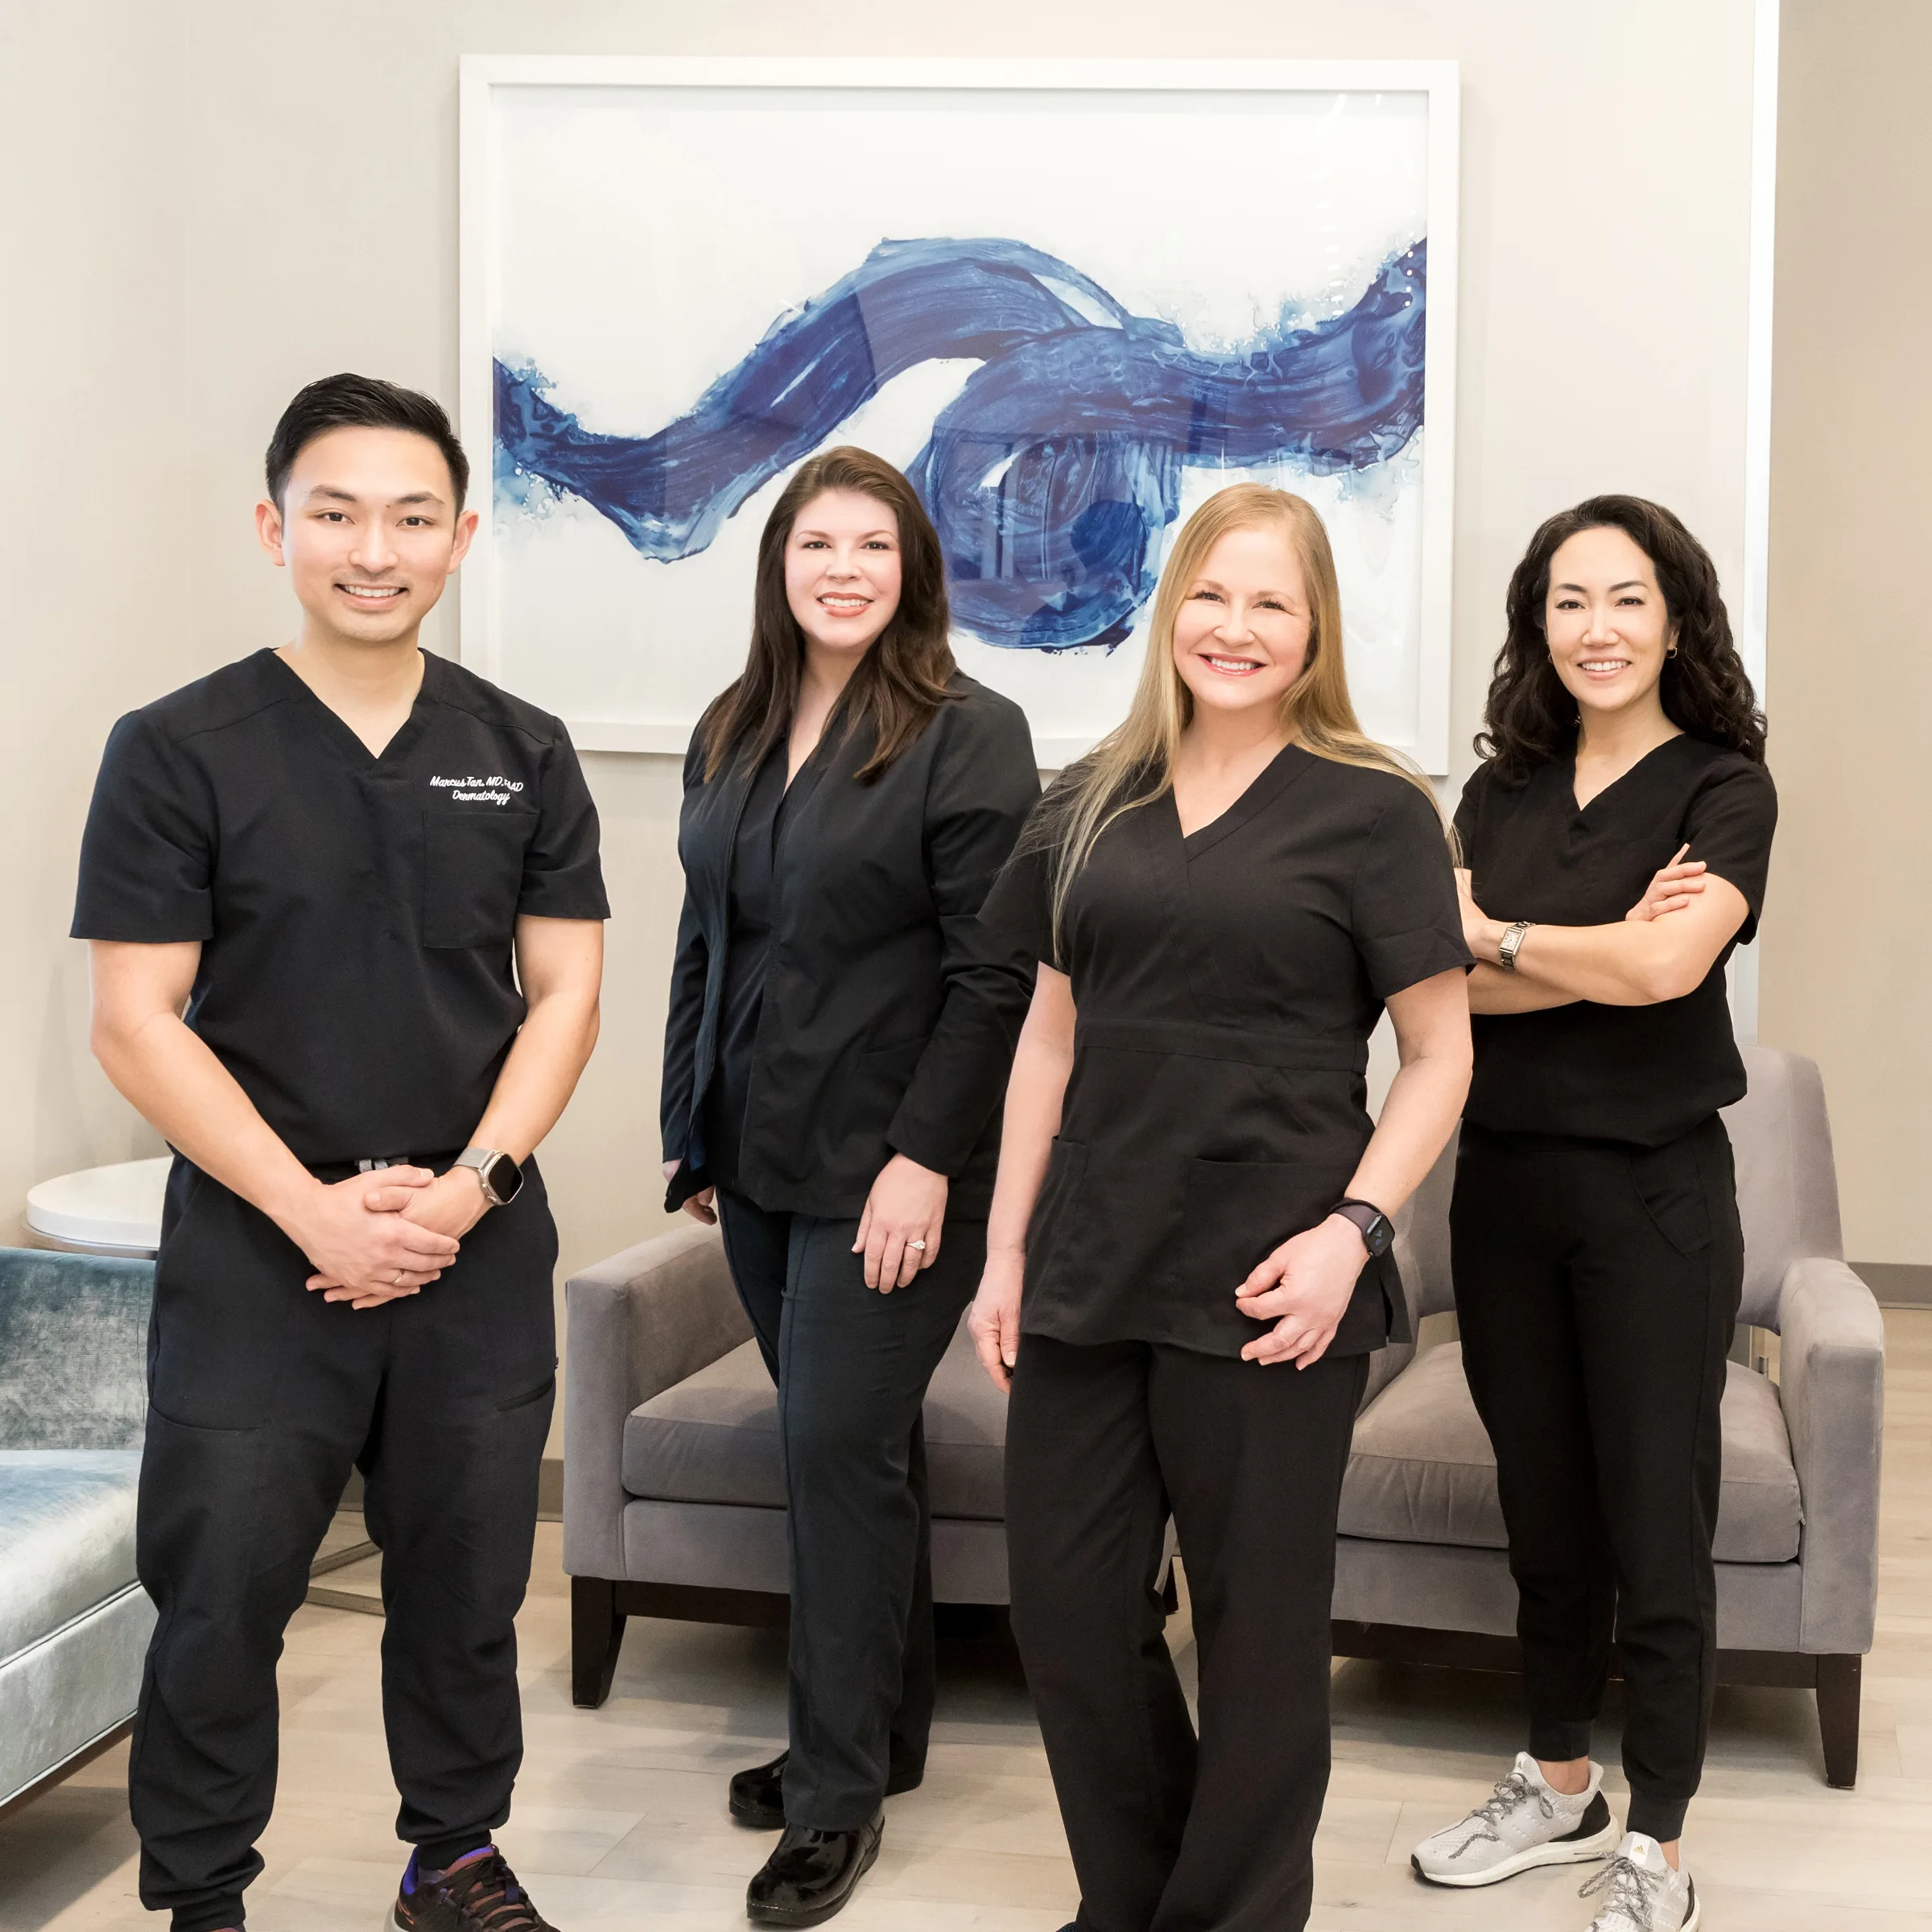 McGuiness Dermatology & Plastic Surgery Marcus Tan, MD, FAAD, Leisa Hodges, DO, Sheryl Gyr, MPAS, PA-C, and Monica Bang, NP-BC